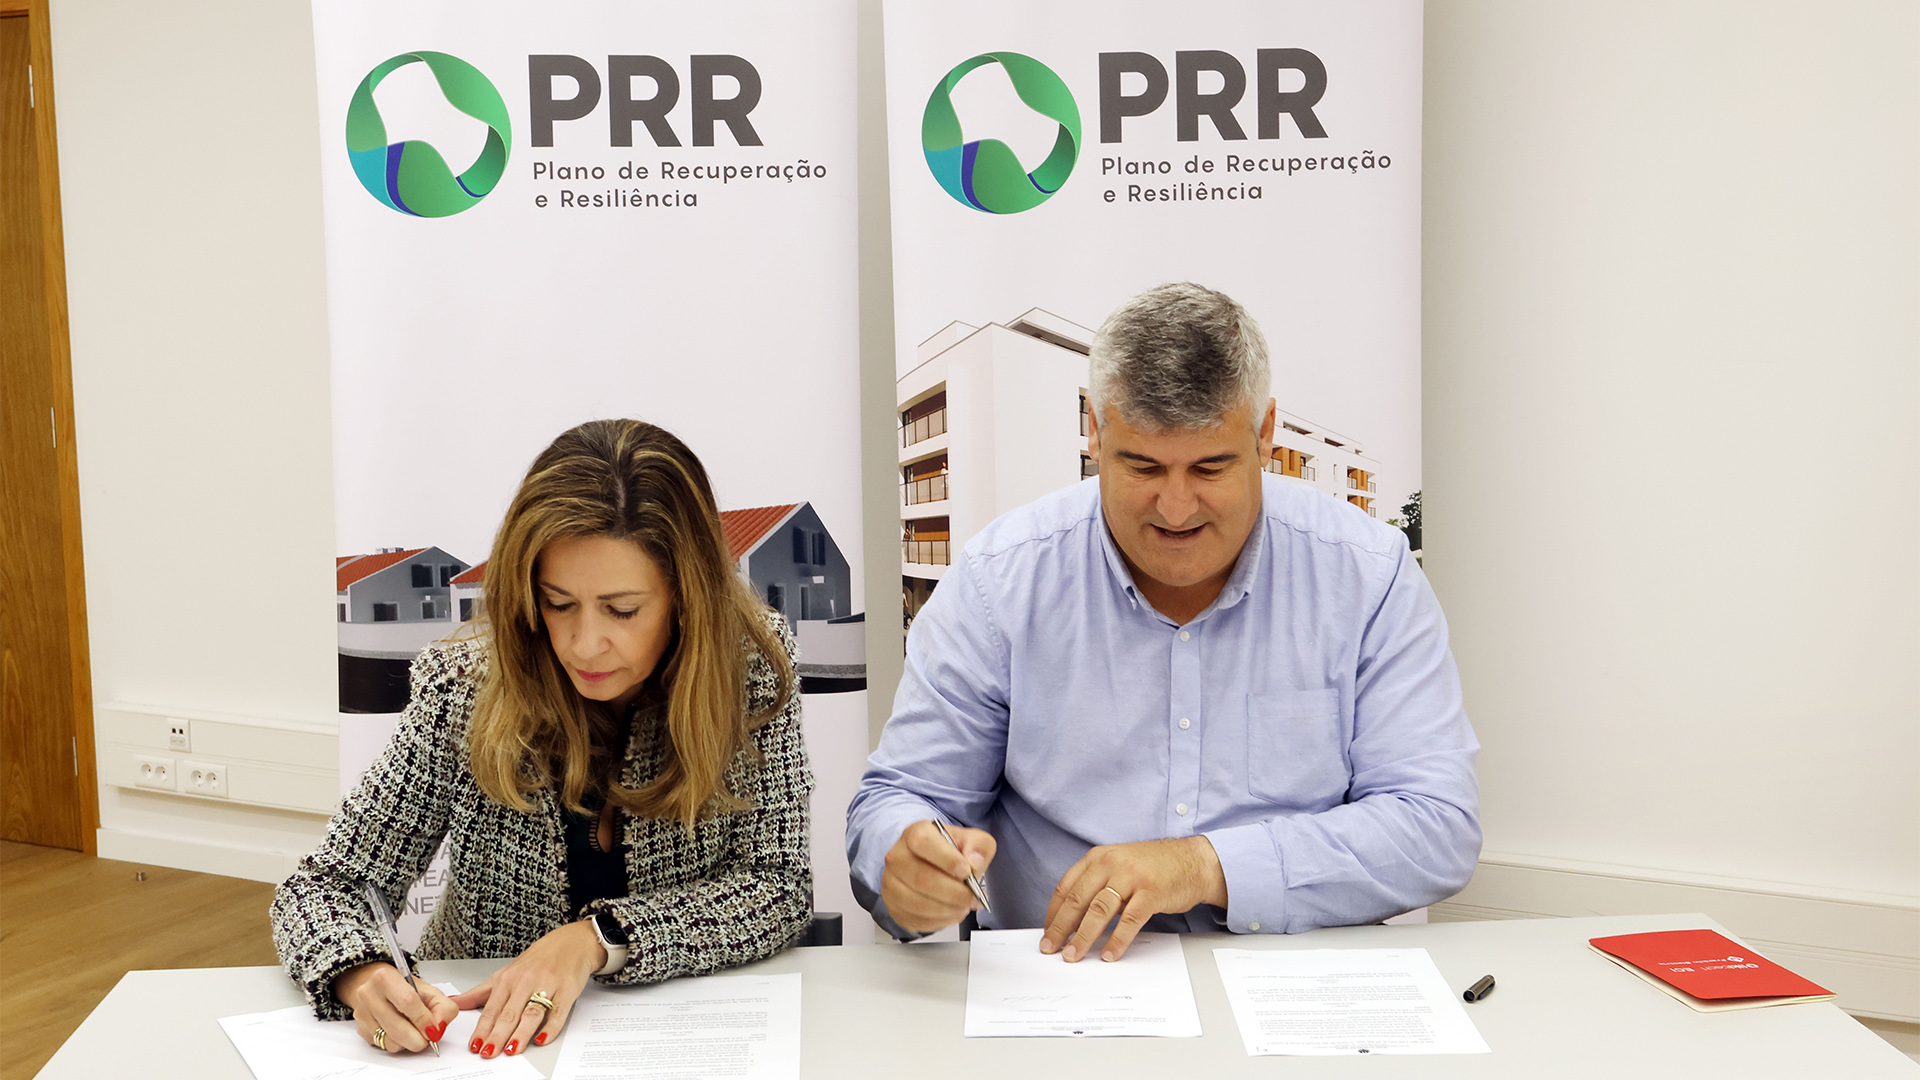 Signature of consignments of contracts for the construction of villas in the Ginets